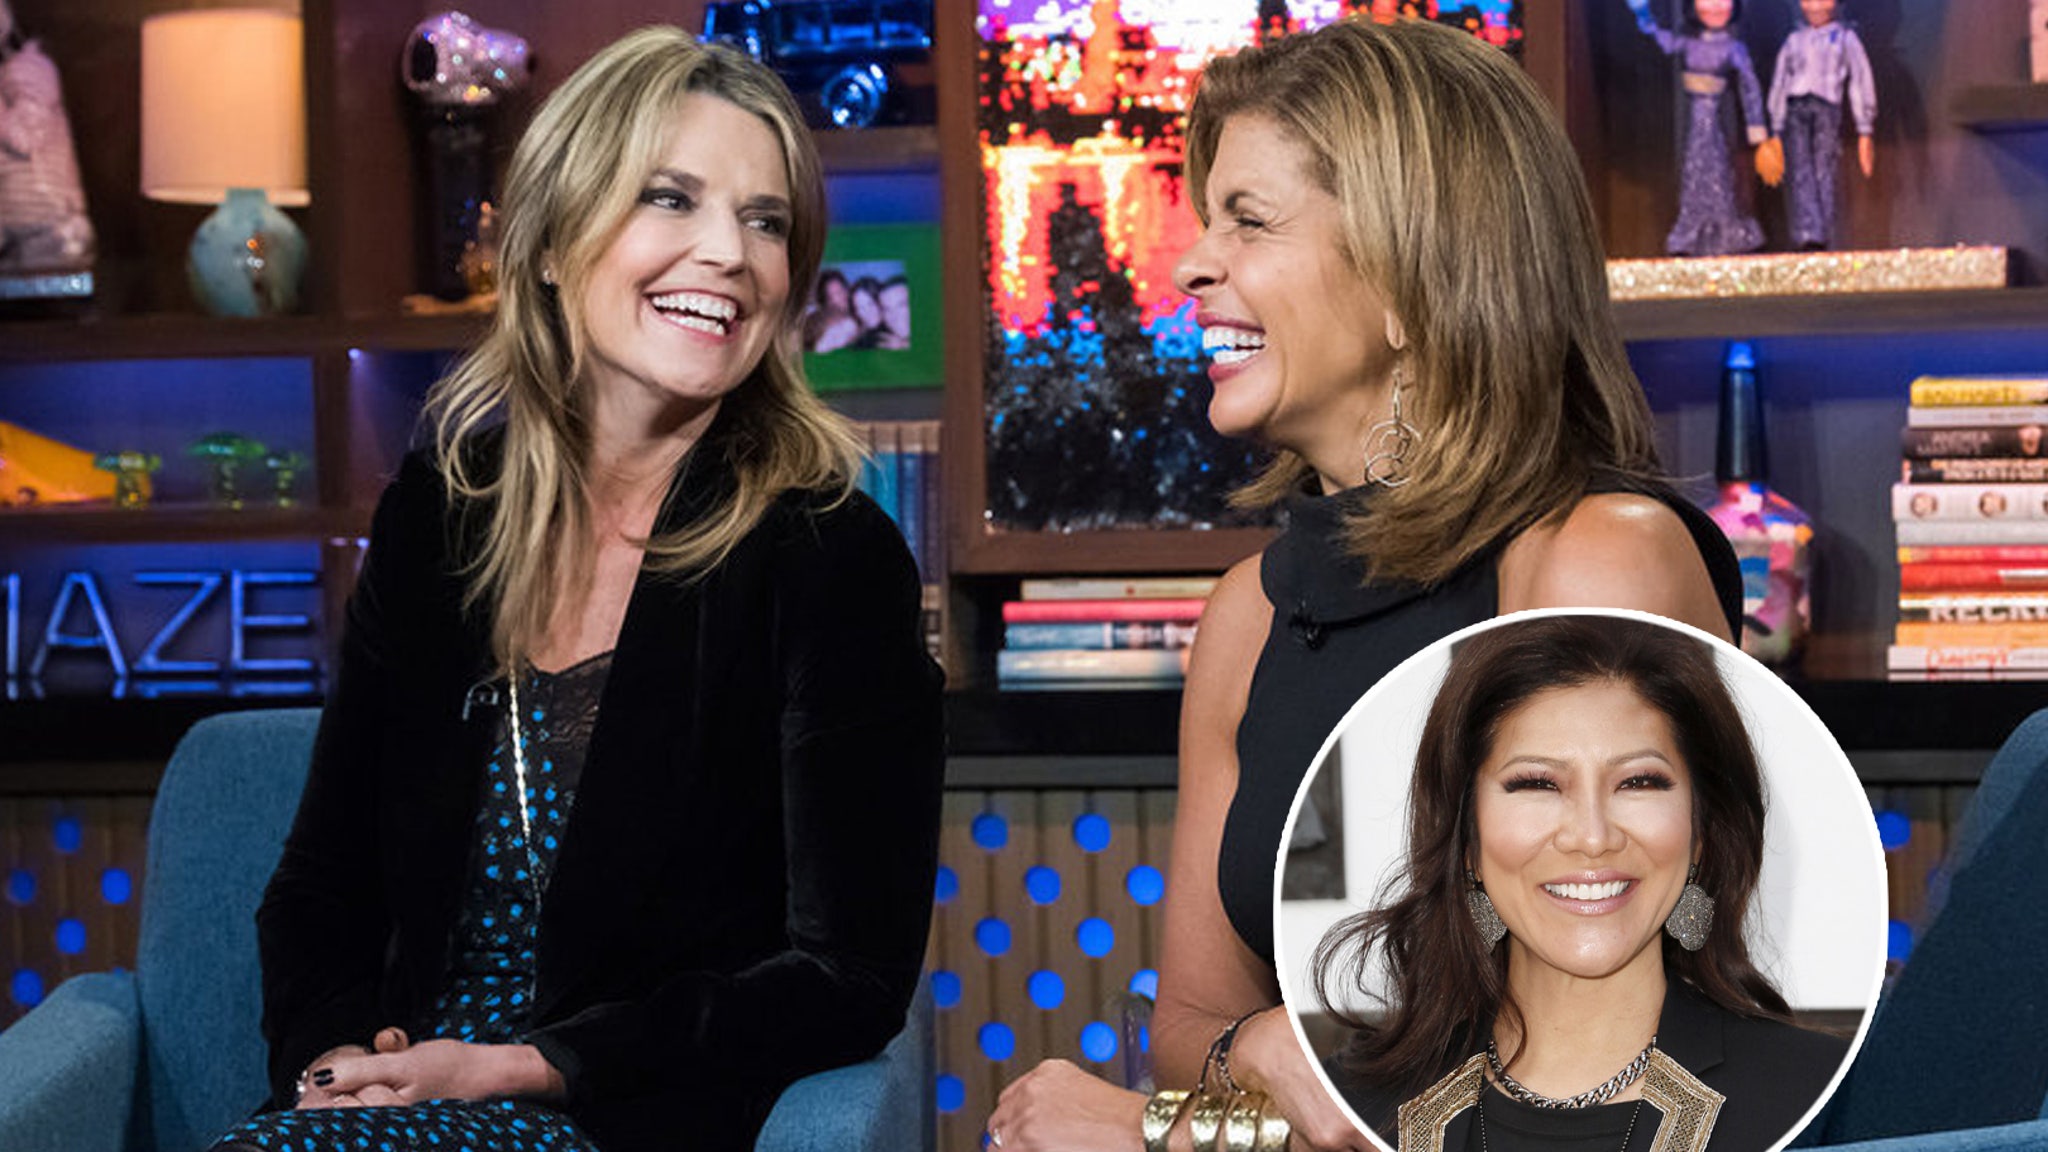 Savannah Guthrie And Hoda Kotb React To Julie Chens Decision To Leave 